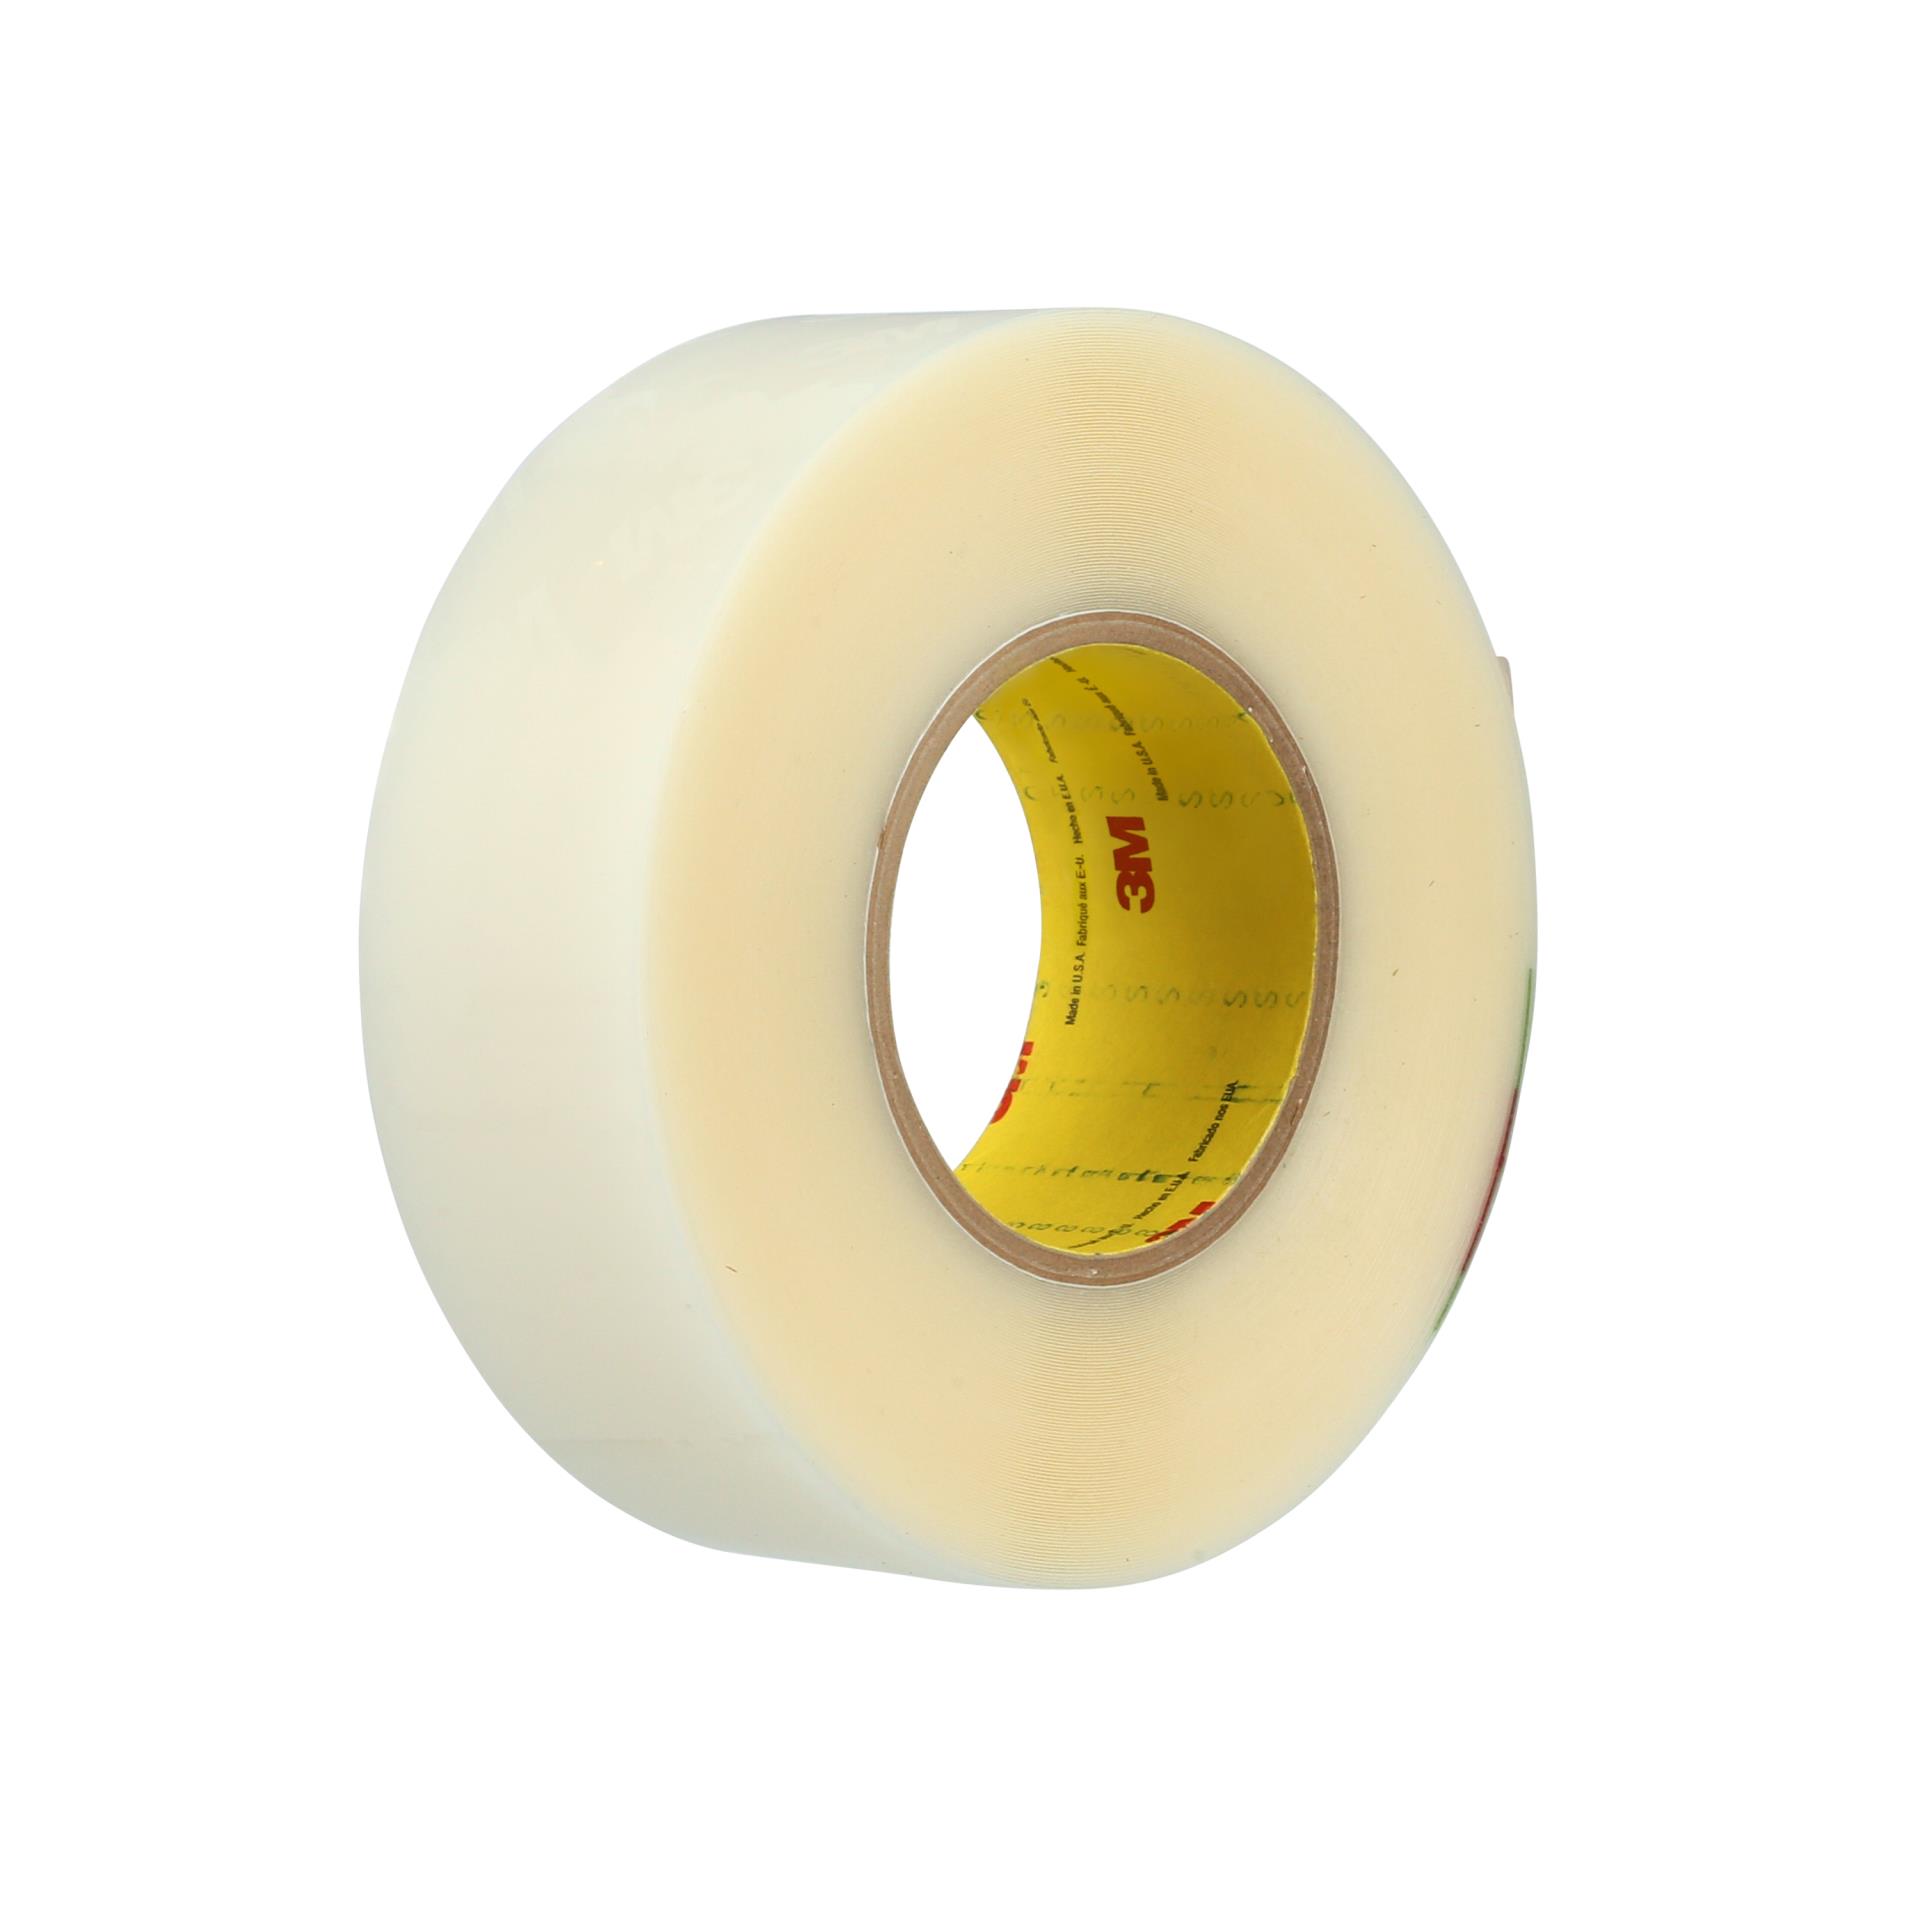 1" core 10 Rolls Clear Transparent Packing Tape 1/2" x 1260" per roll 